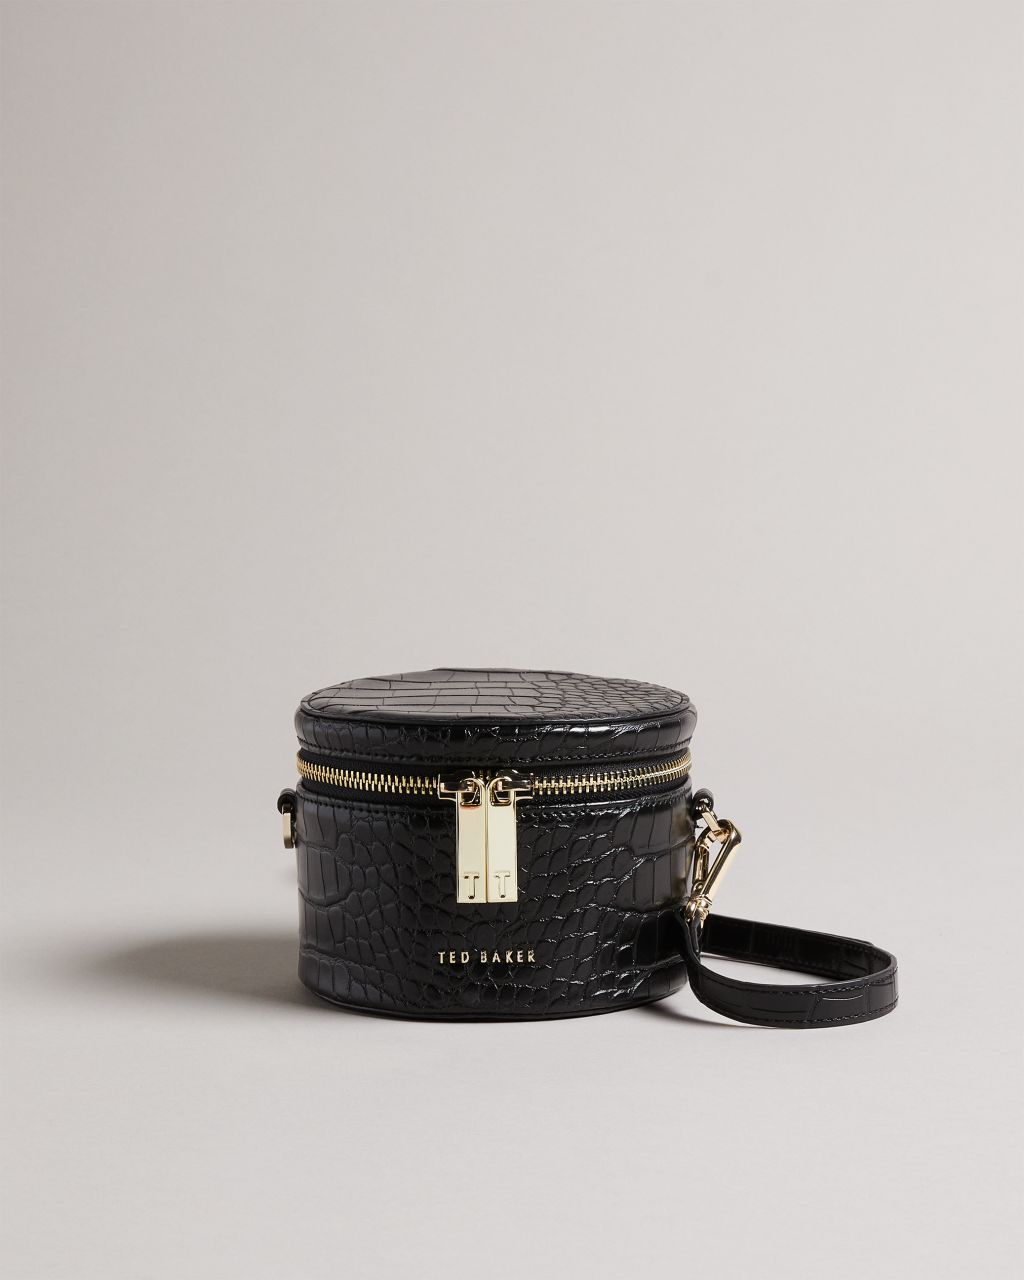 Ted Baker Women's Croc Faux Leather Drum Bag in Black, Salmaa